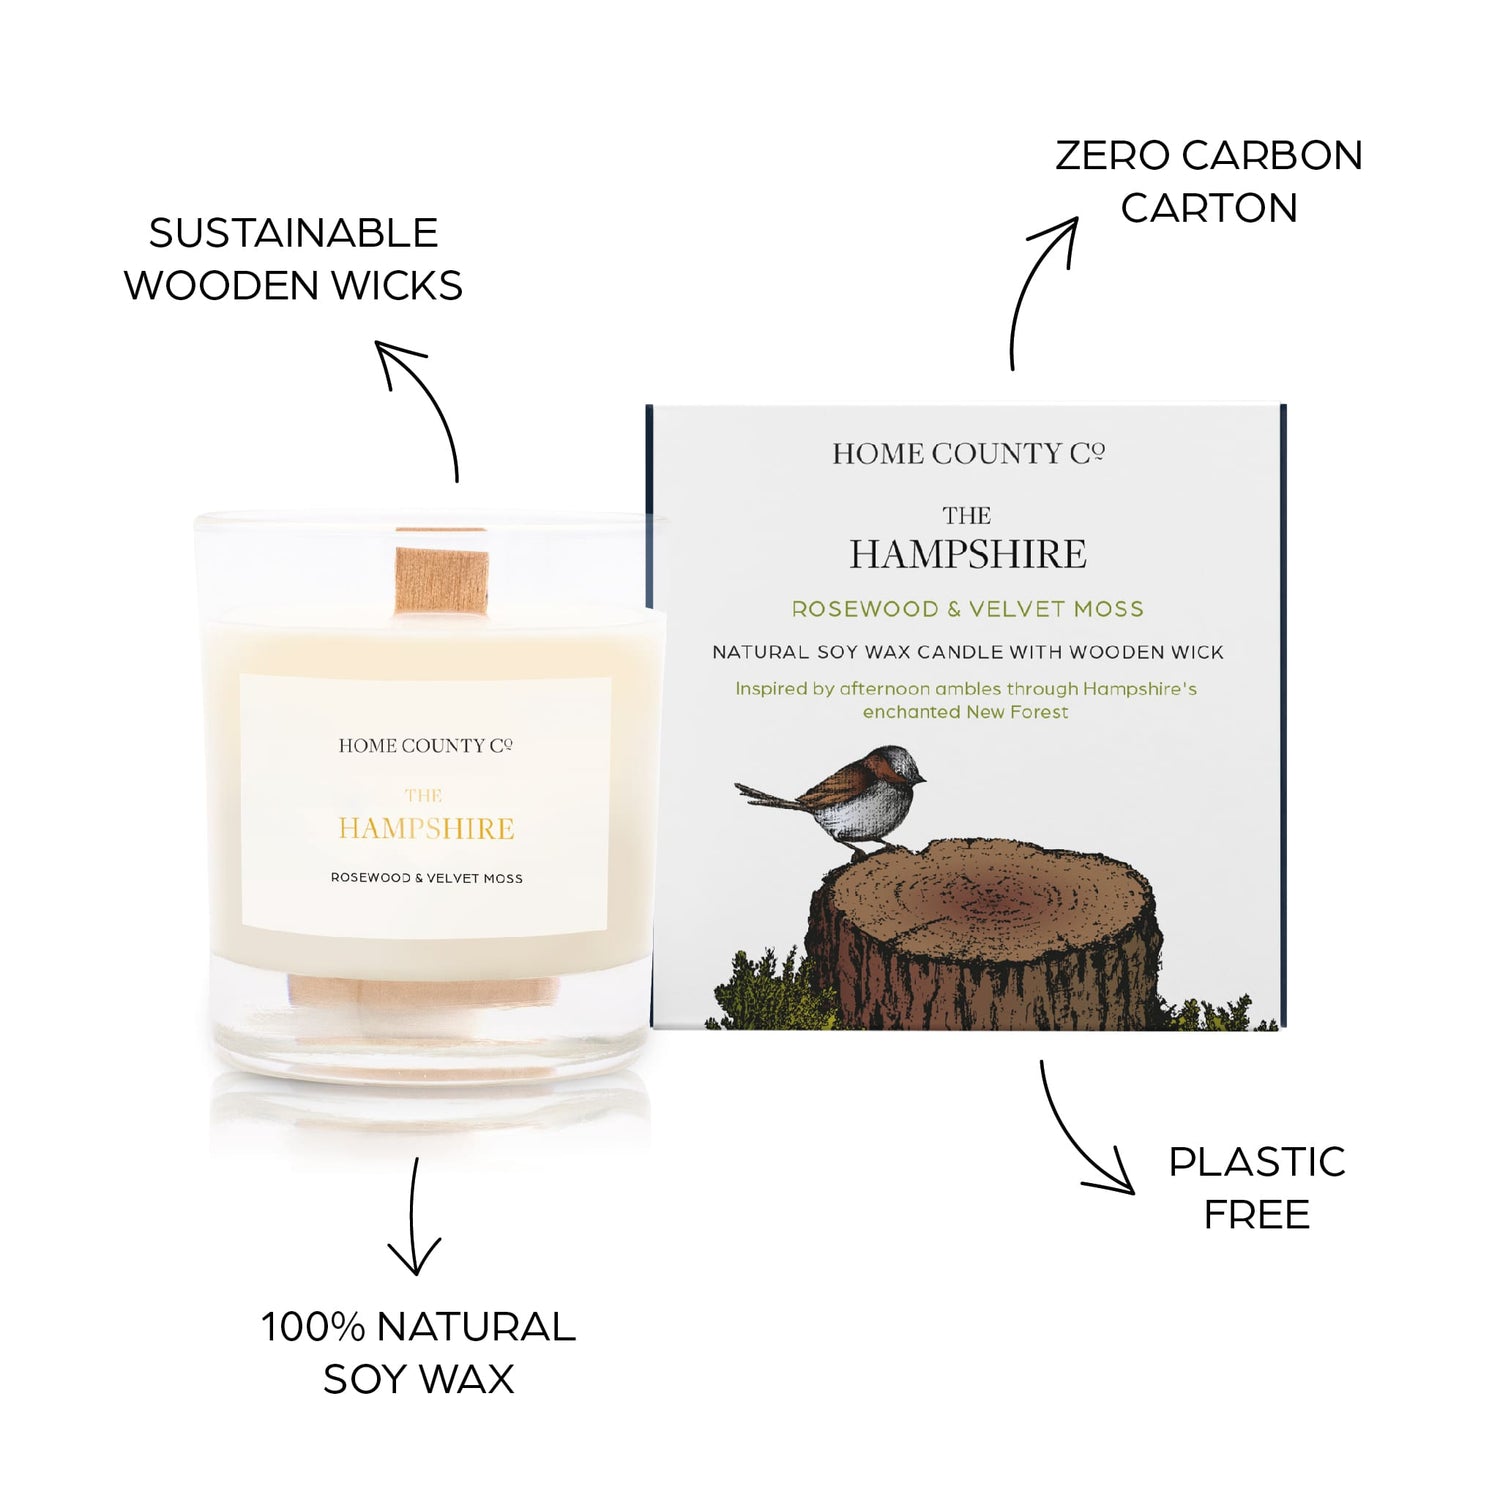 Sustainable candle credentials are shown around the wood scented candle image - sustainable wooden wicks, zero carbon carton, 100% natural soy wax, plastic free